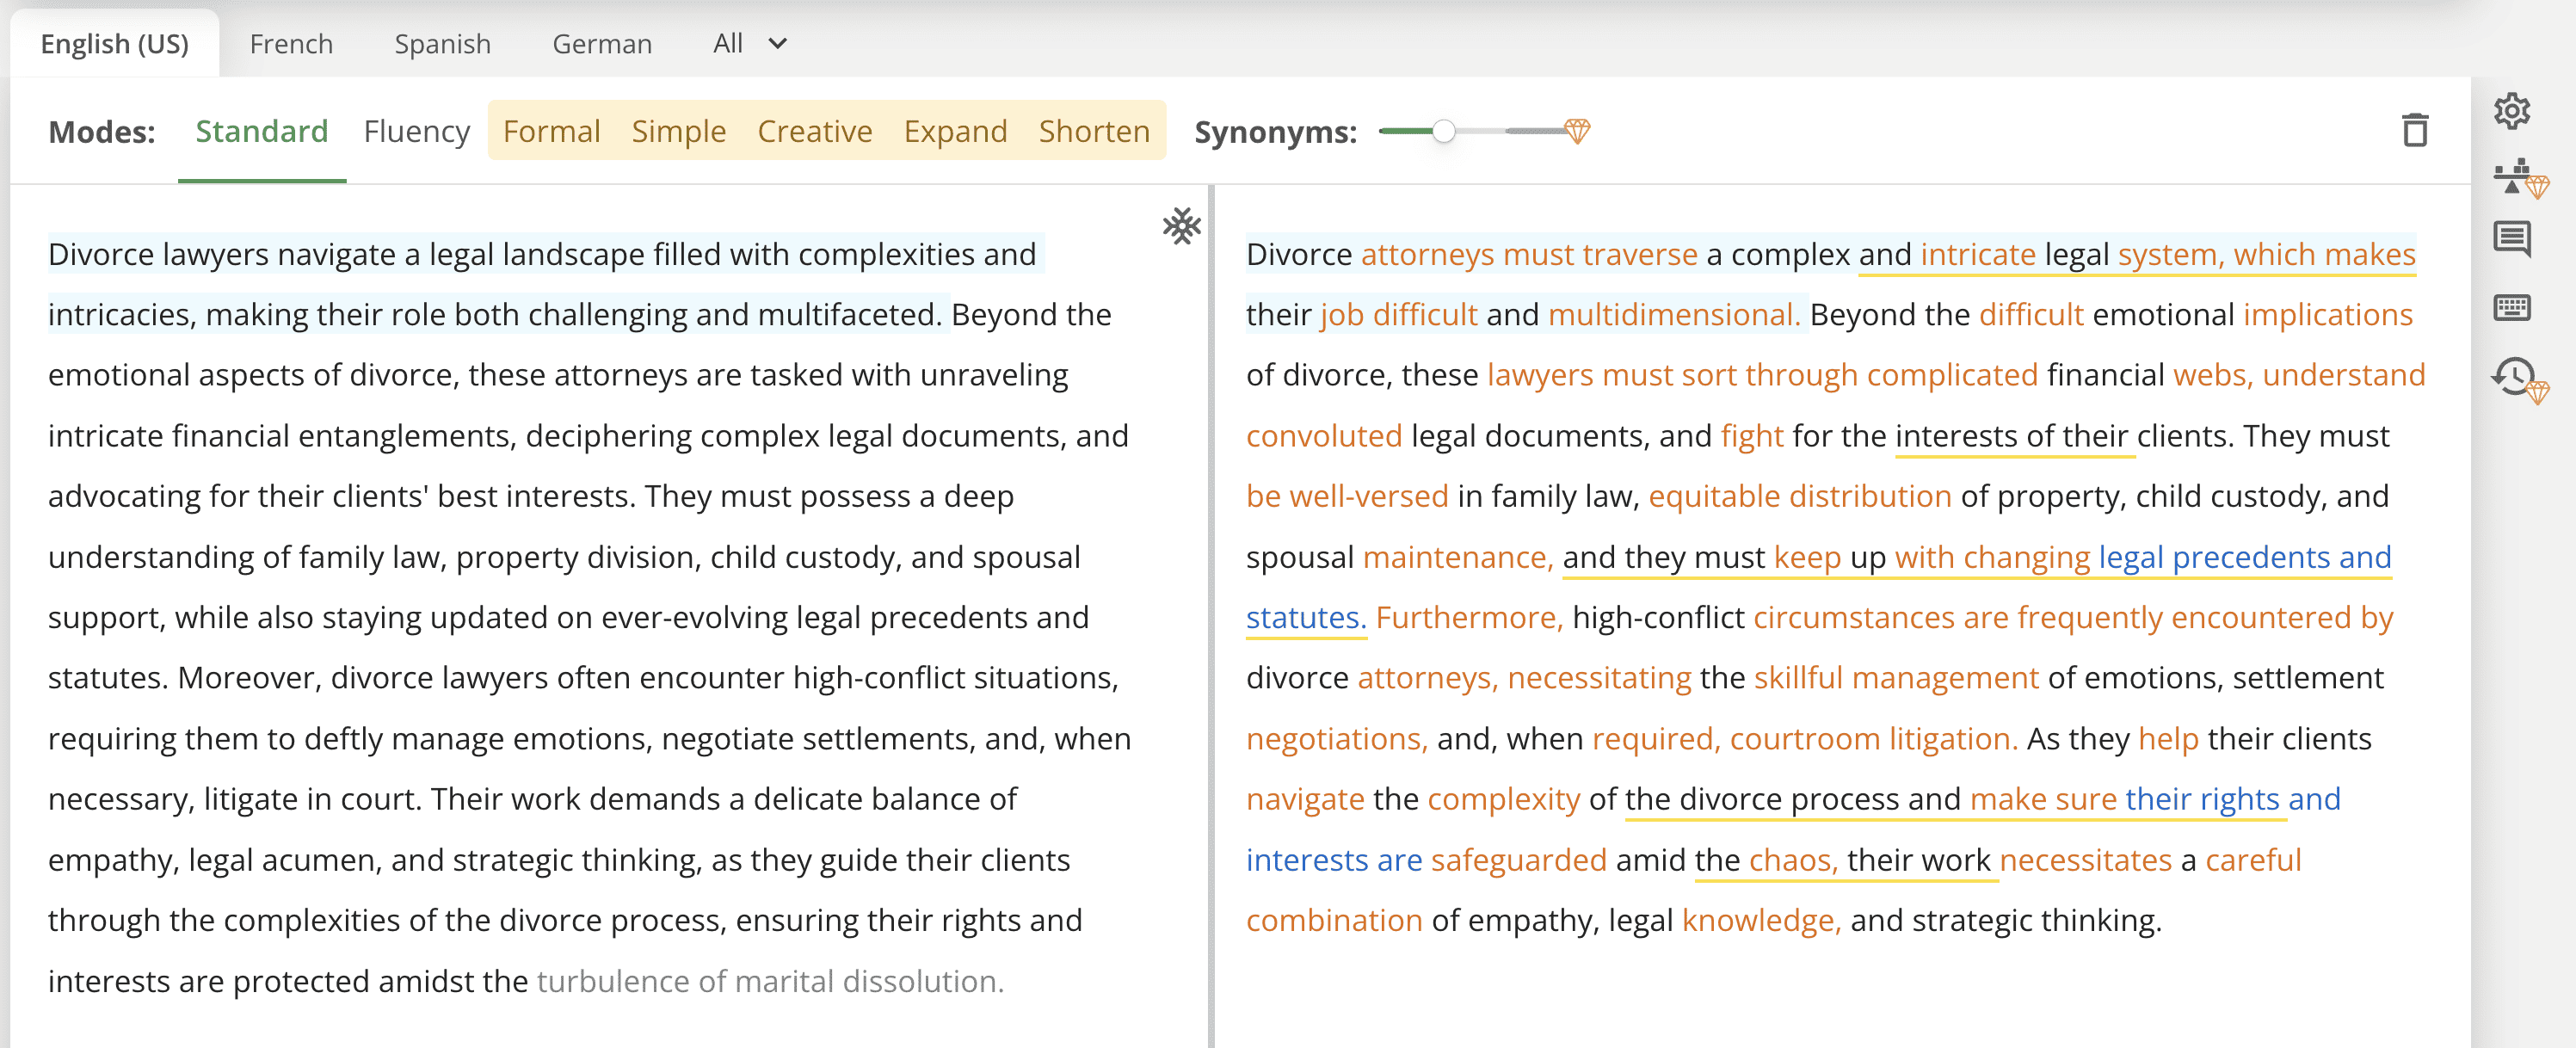 QuillBot changed text (highlighted in orange and blue text) with the option to click and change words as you wish